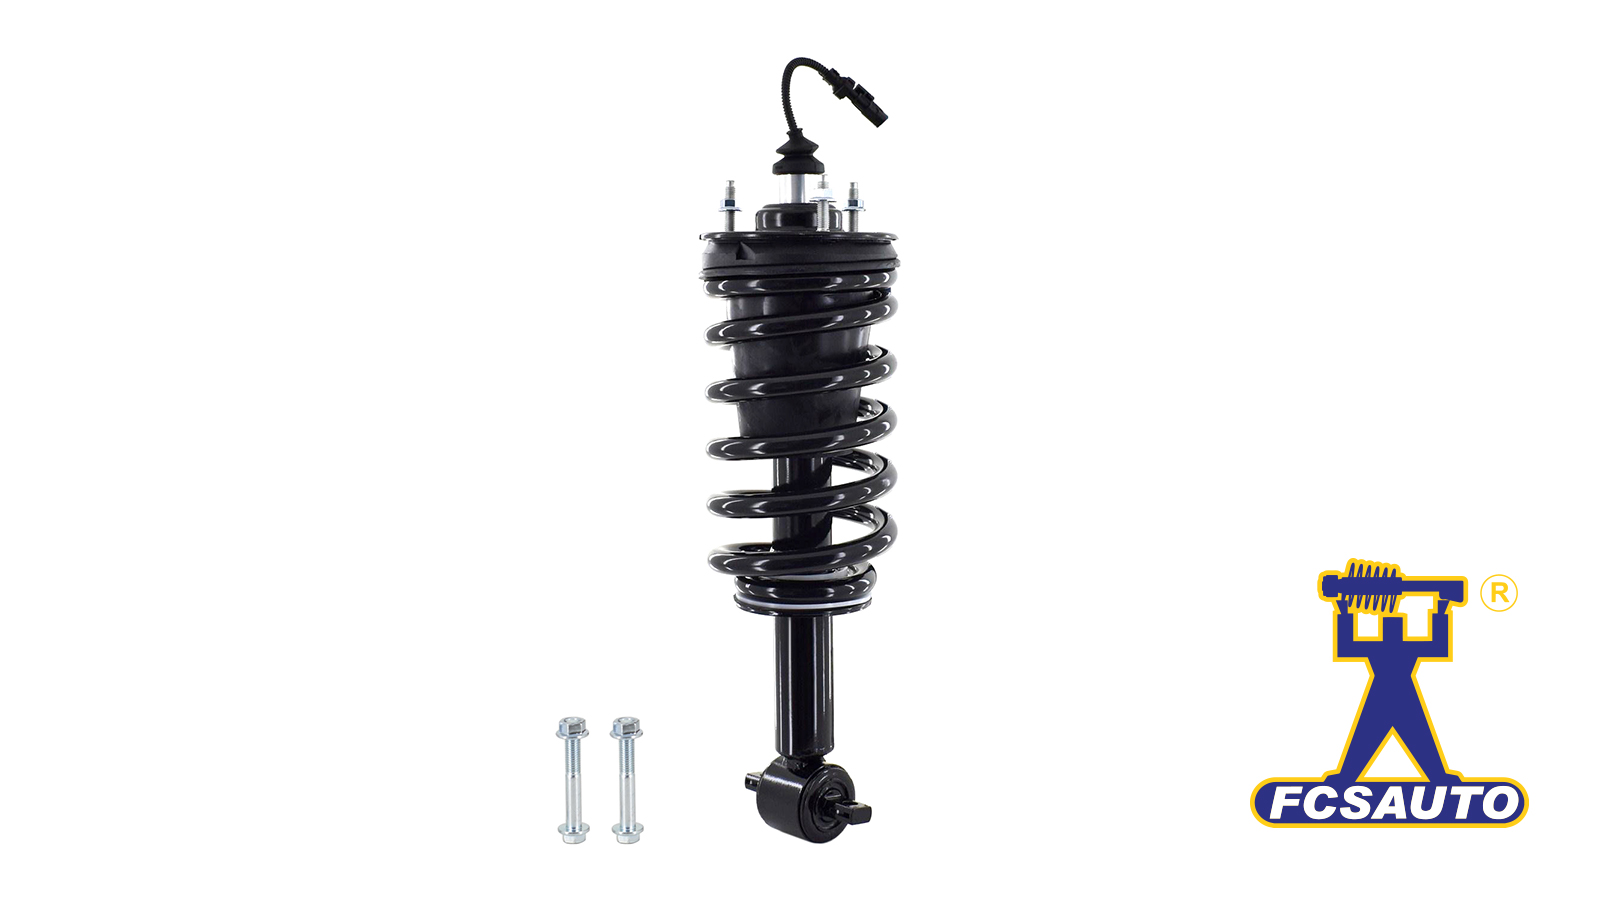 Installation Tips for Magnetic Ride Control Complete Strut Assemblies on 2015-2020 Cadillac Escalade, Chevrolet Tahoe and GMC Yukon SUVs (short wheelbase)